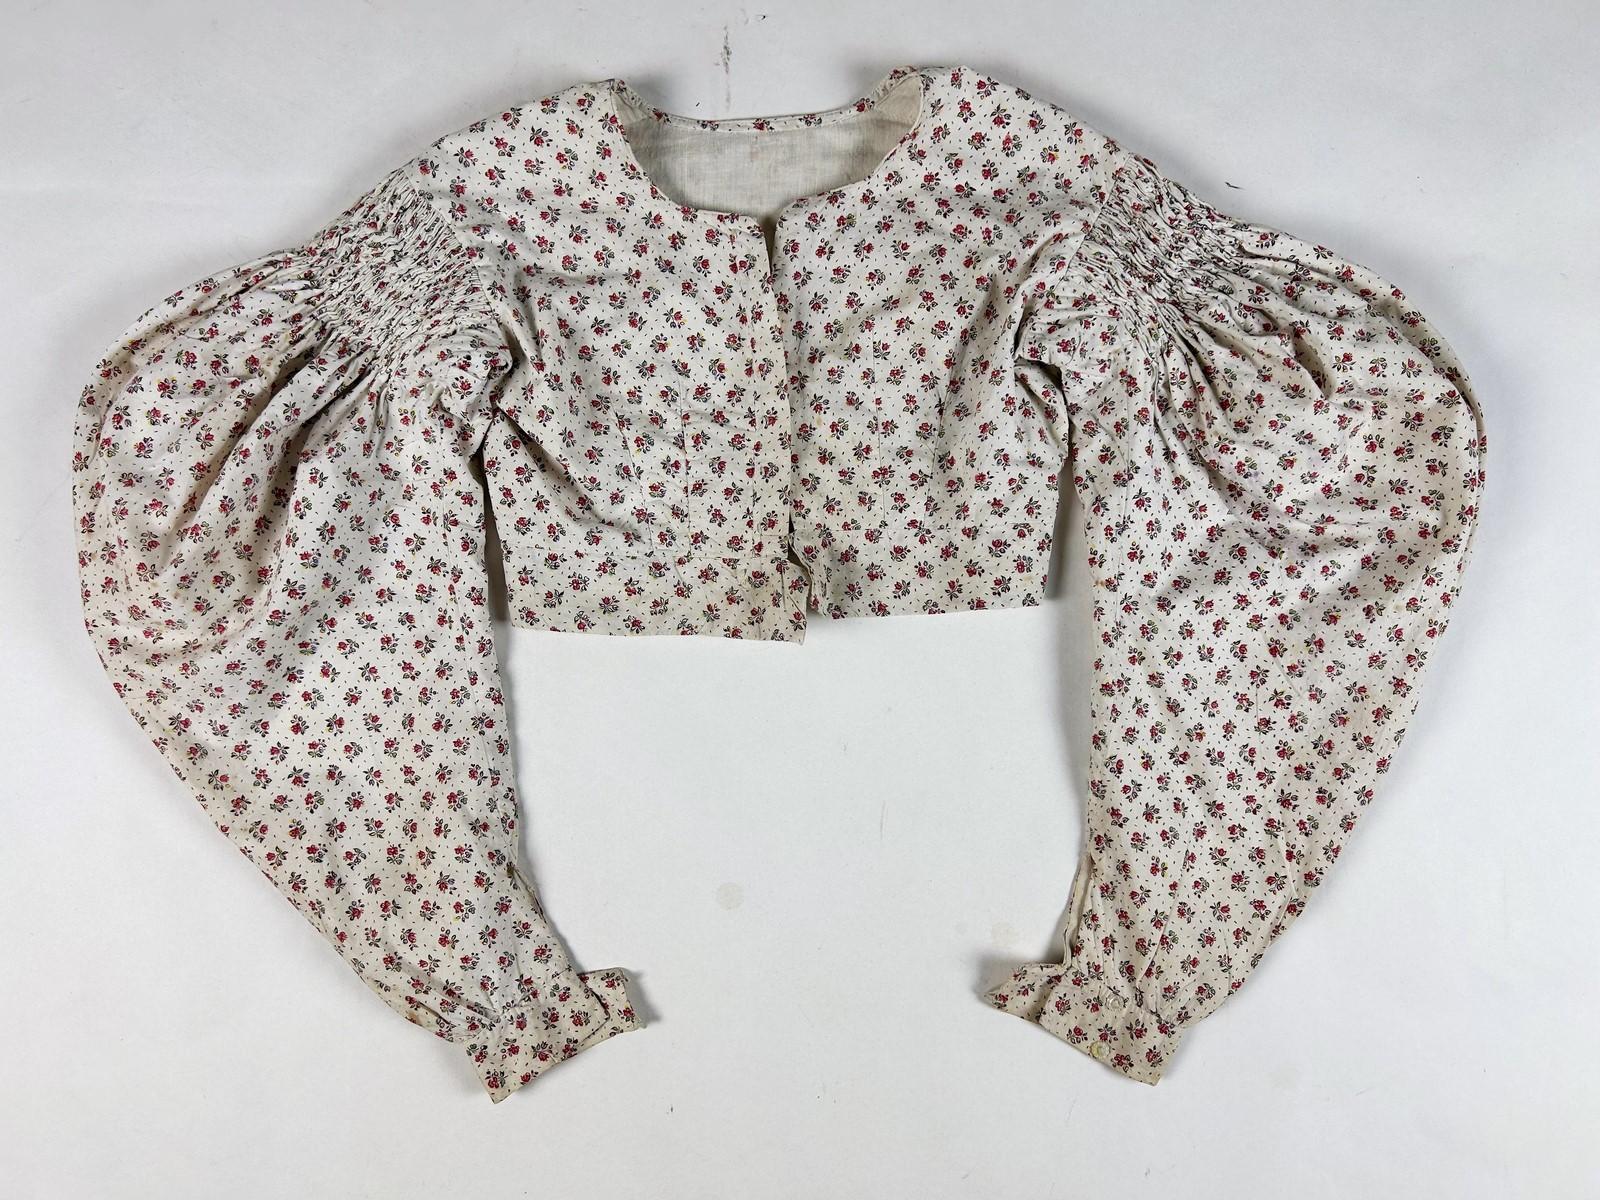 A Printed cotton Caraco with Mutton sleeves - France Circa 1830 For Sale 11